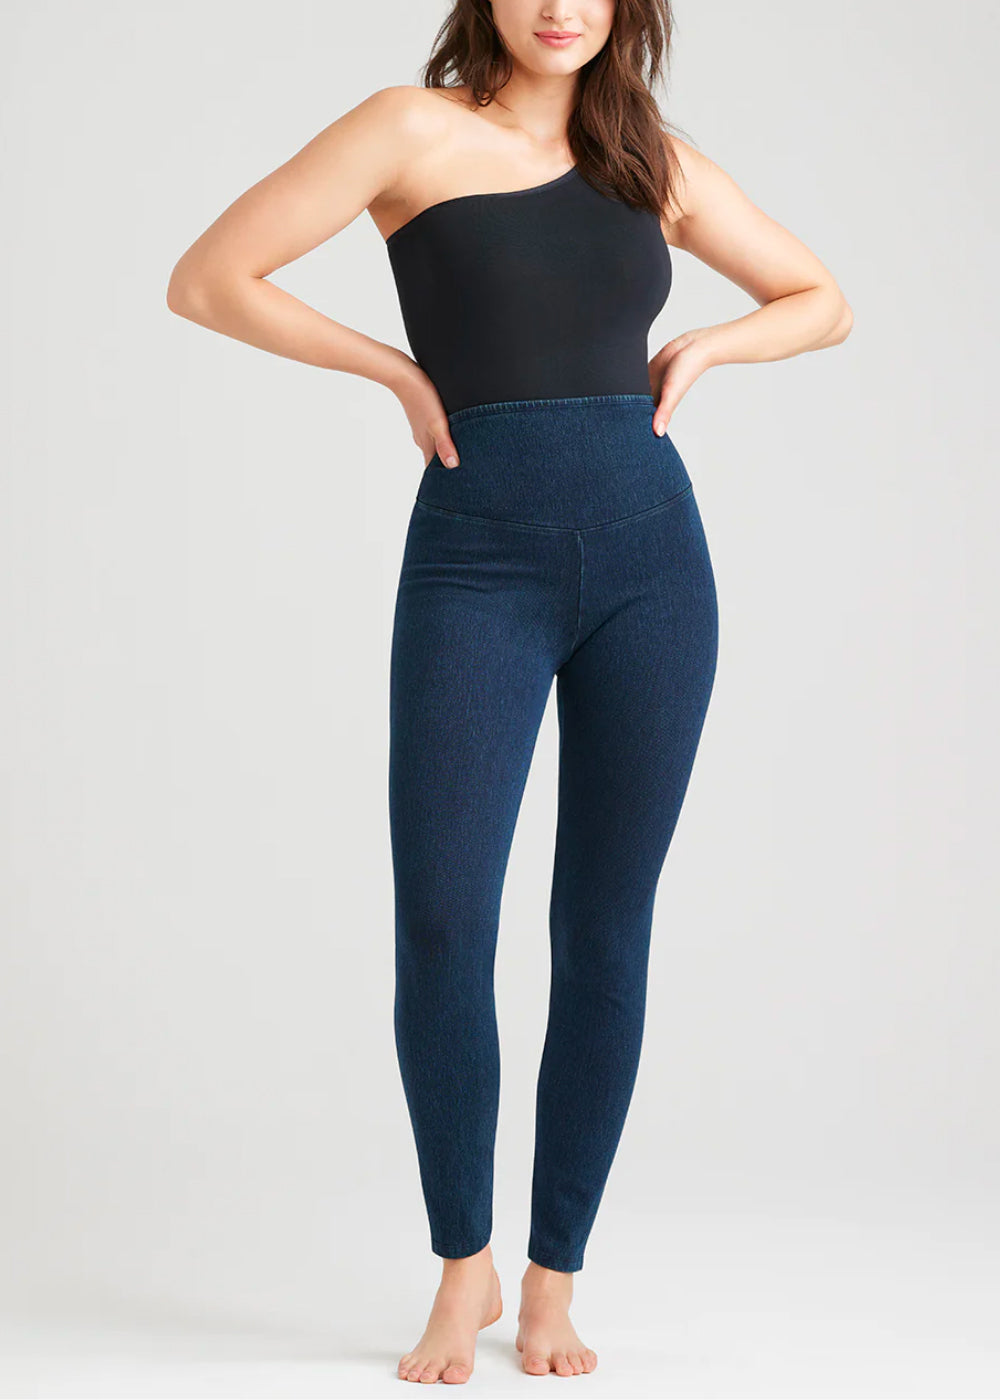  Seamless Leggings For Women Tummy Control Port Navy XS One  Size